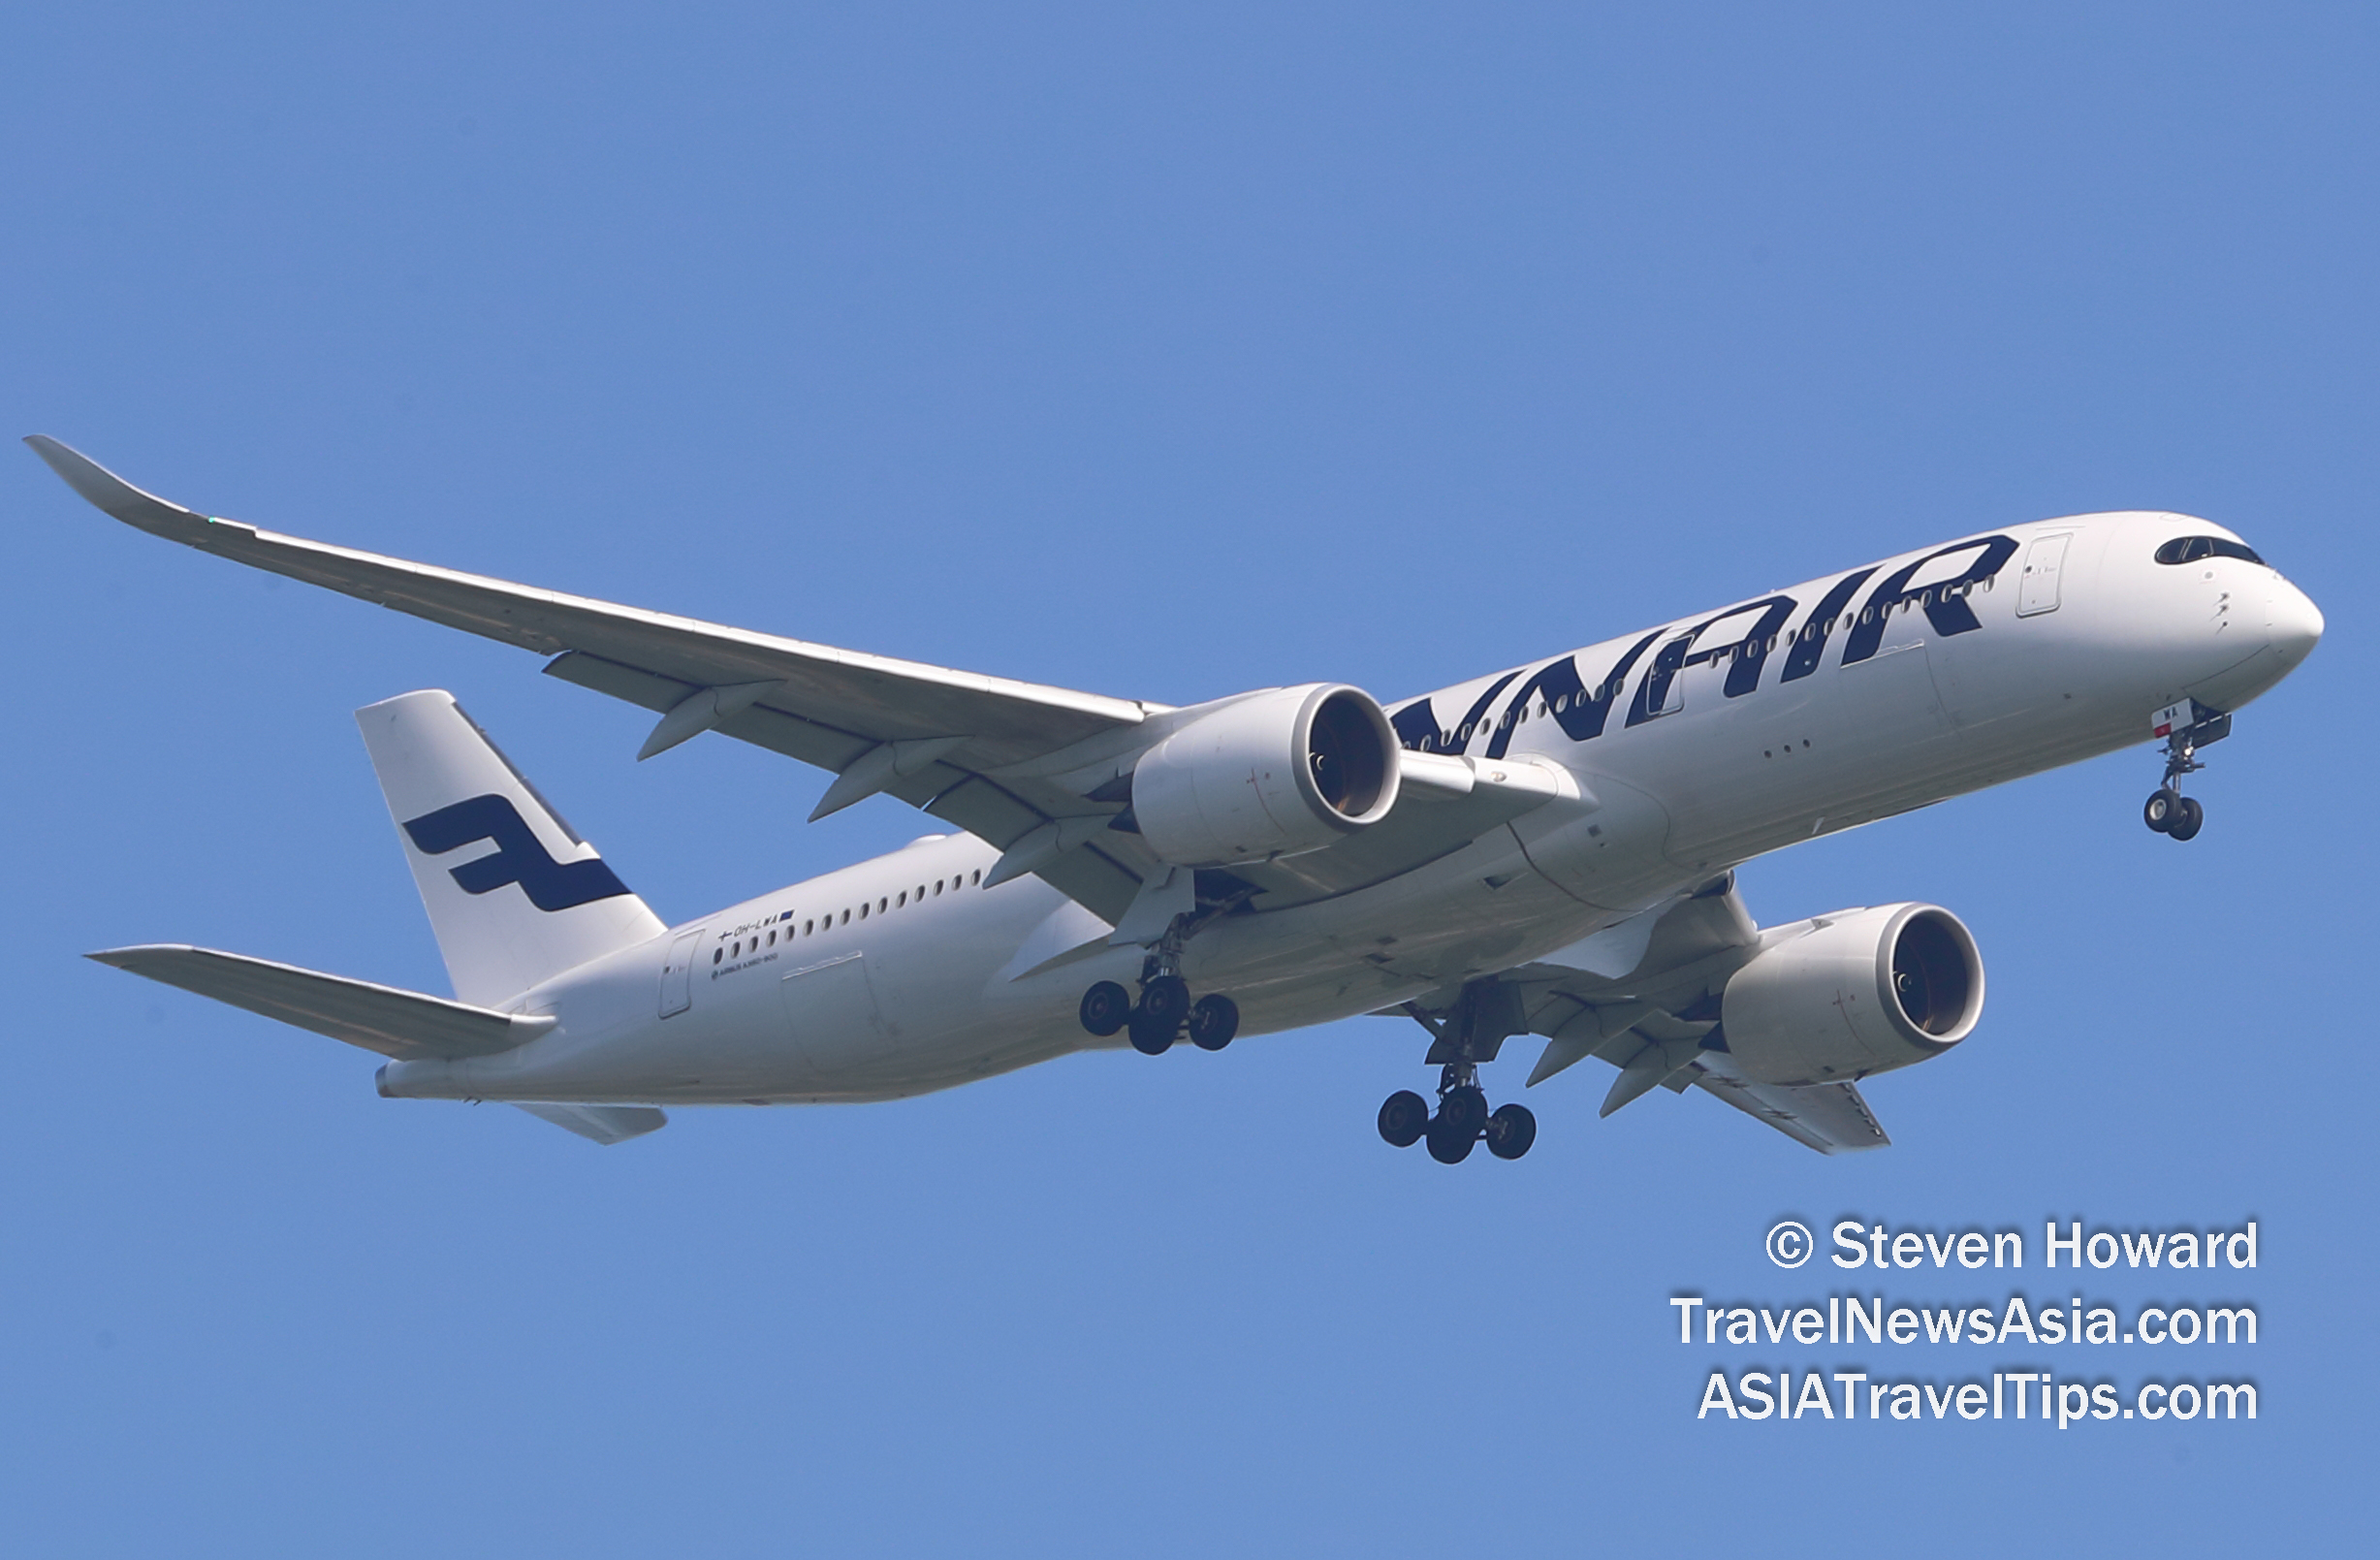 Finnair Airbus A350 reg: DH-LWA. Picture by Steven Howard of TravelNewsAsia.com Click to enlarge.